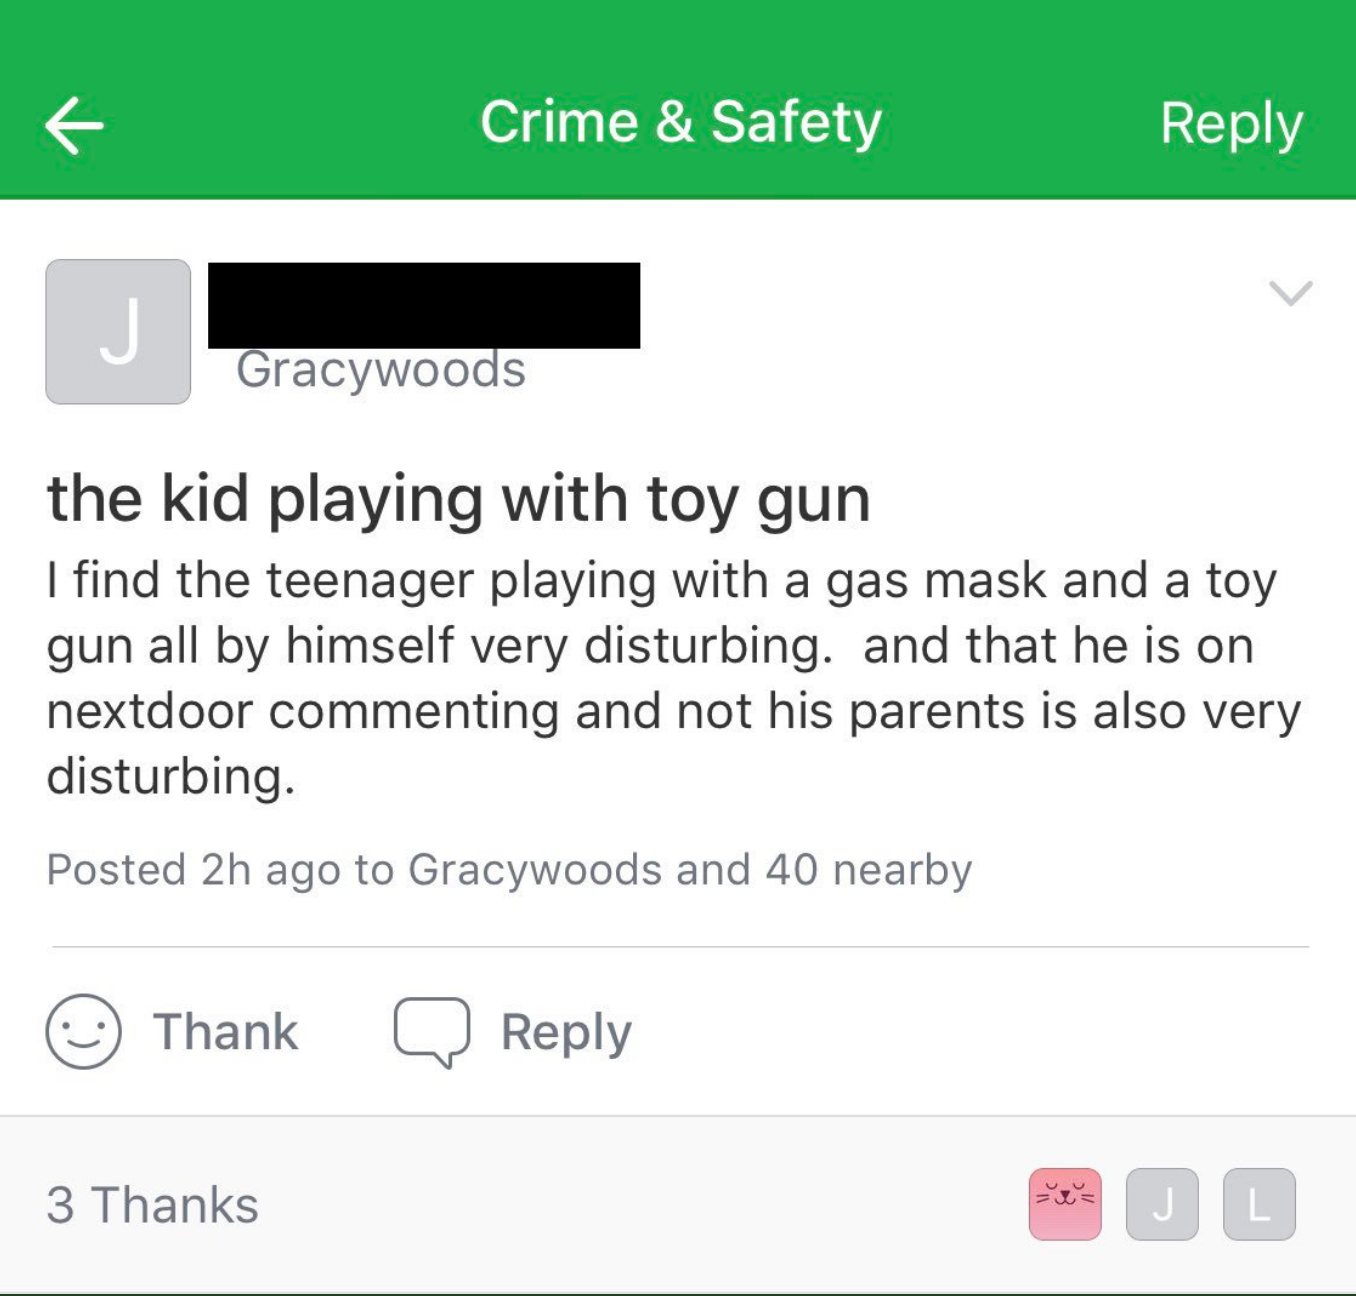 web page - Crime & Safety Gracywoods the kid playing with toy gun I find the teenager playing with a gas mask and a toy gun all by himself very disturbing. and that he is on nextdoor commenting and not his parents is also very disturbing. Posted 2h ago to